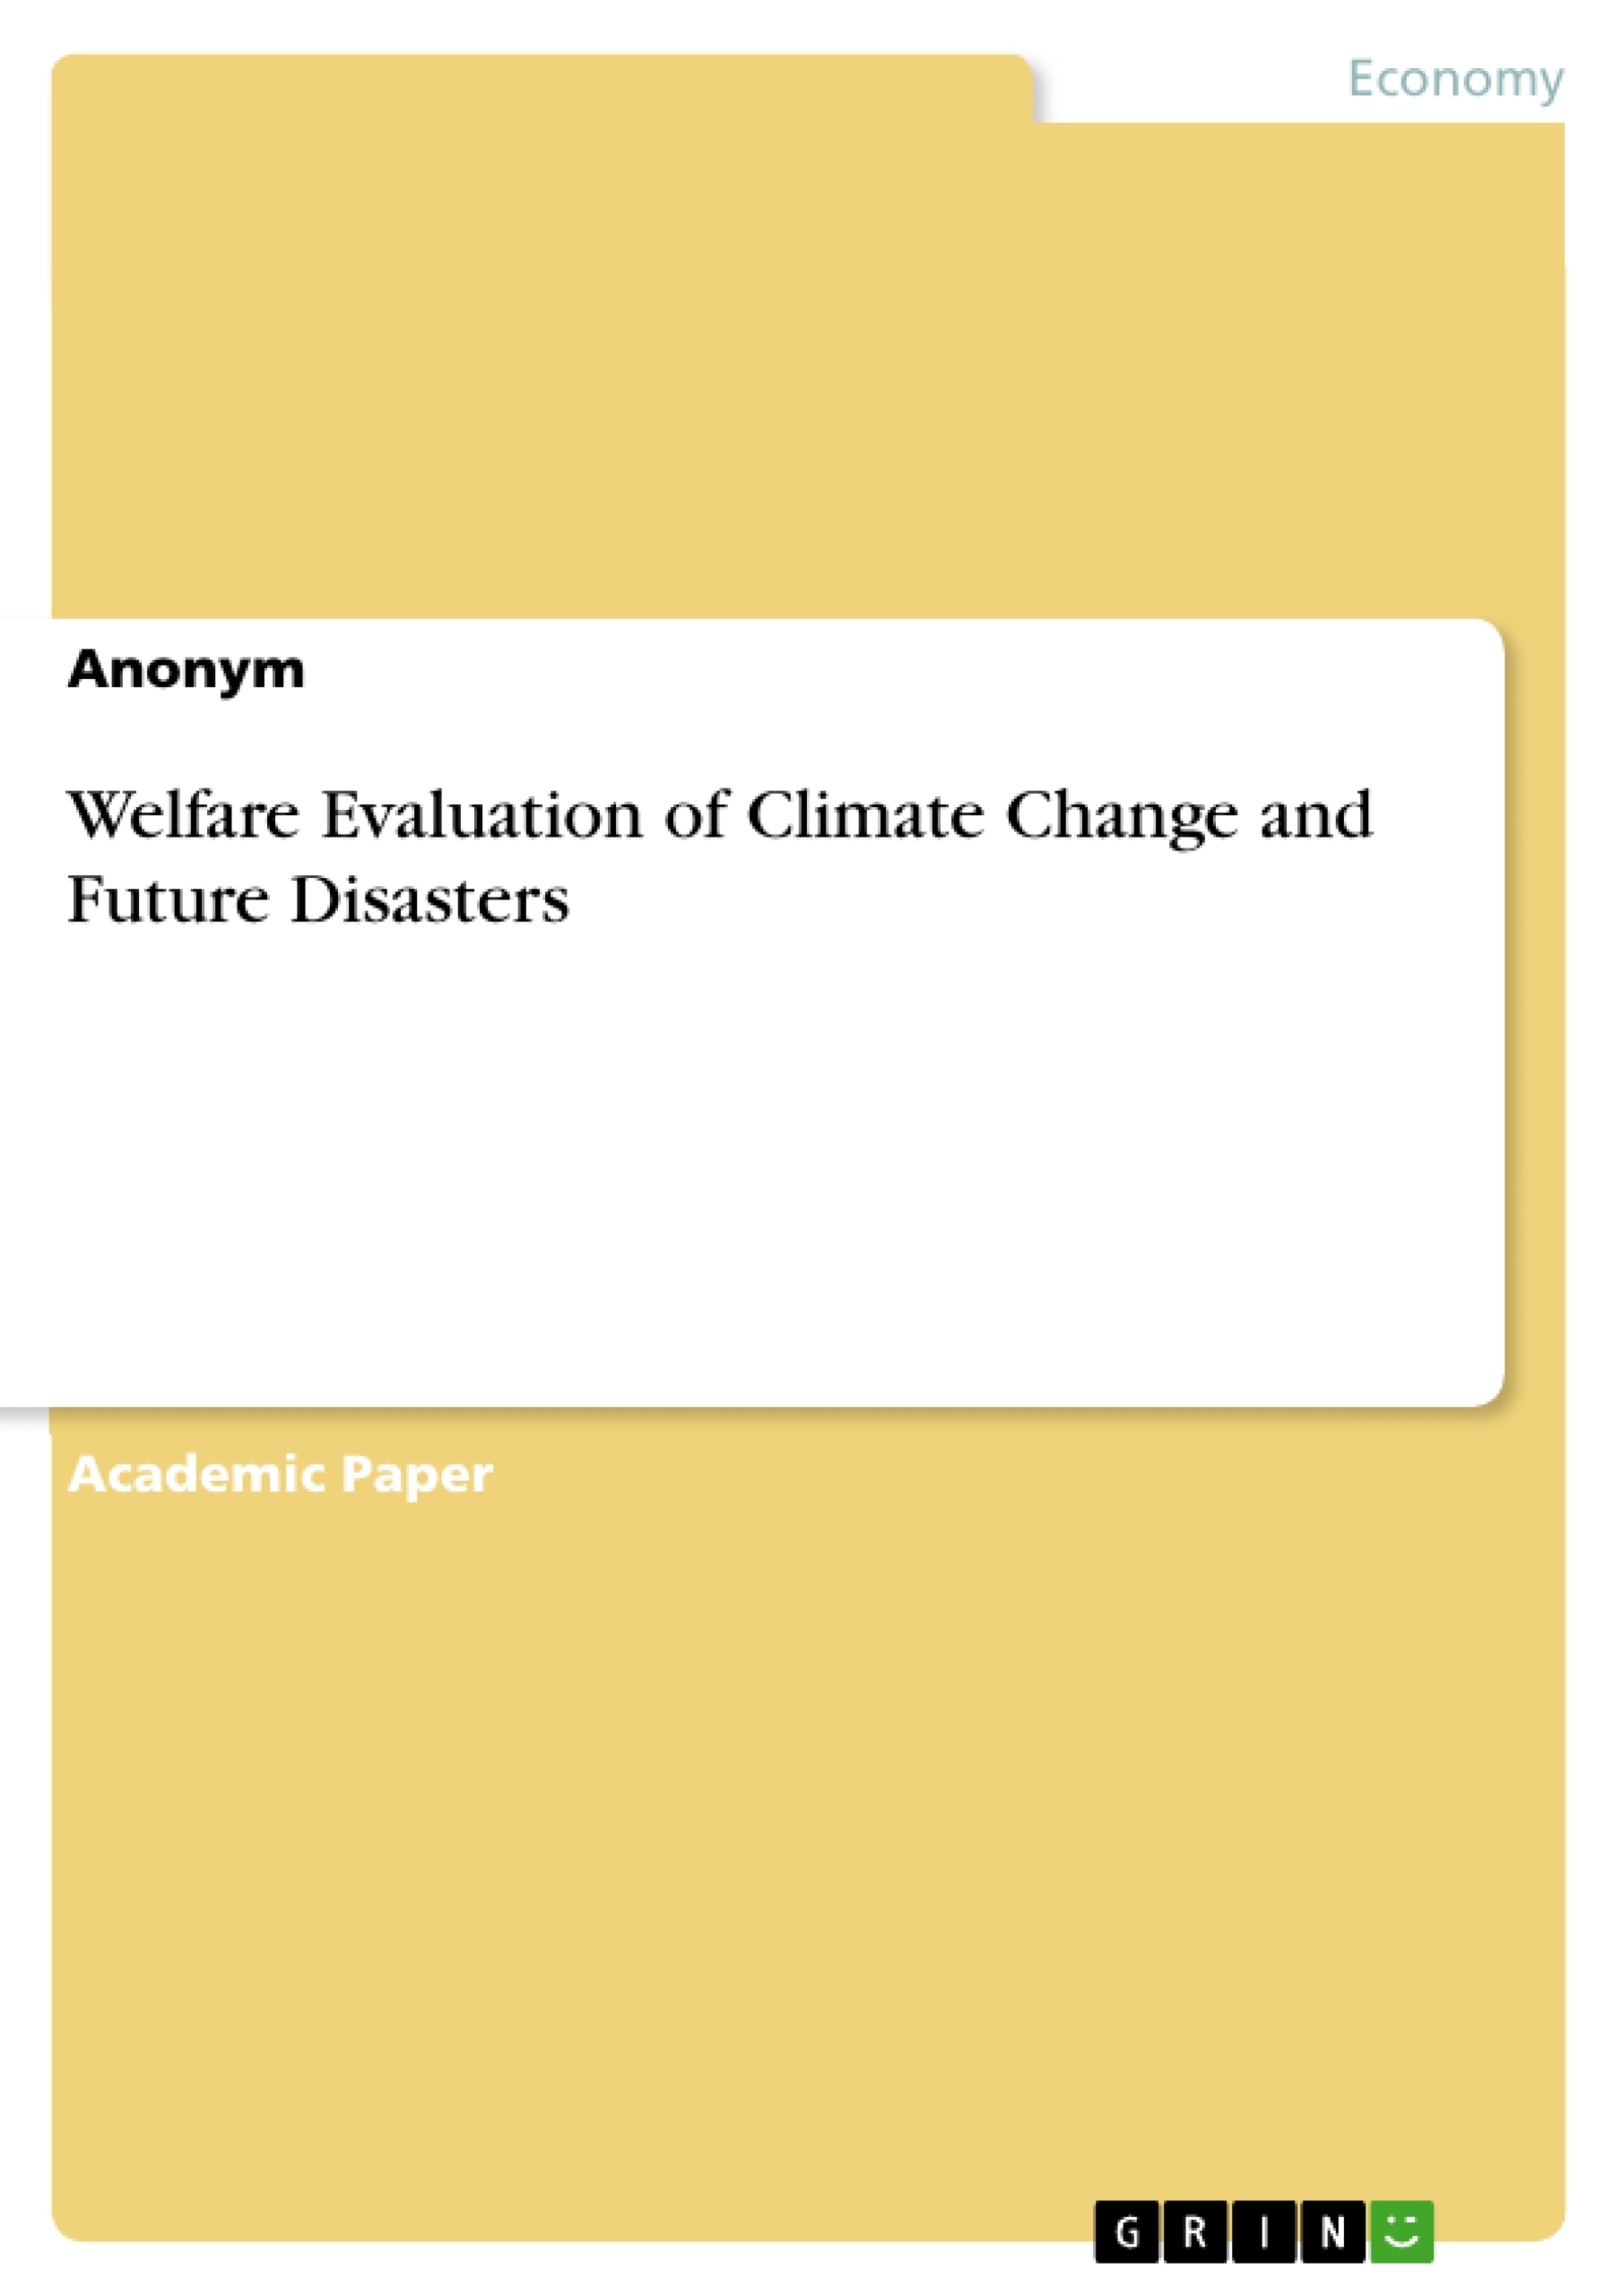 Titre: Welfare Evaluation of Climate Change and Future Disasters